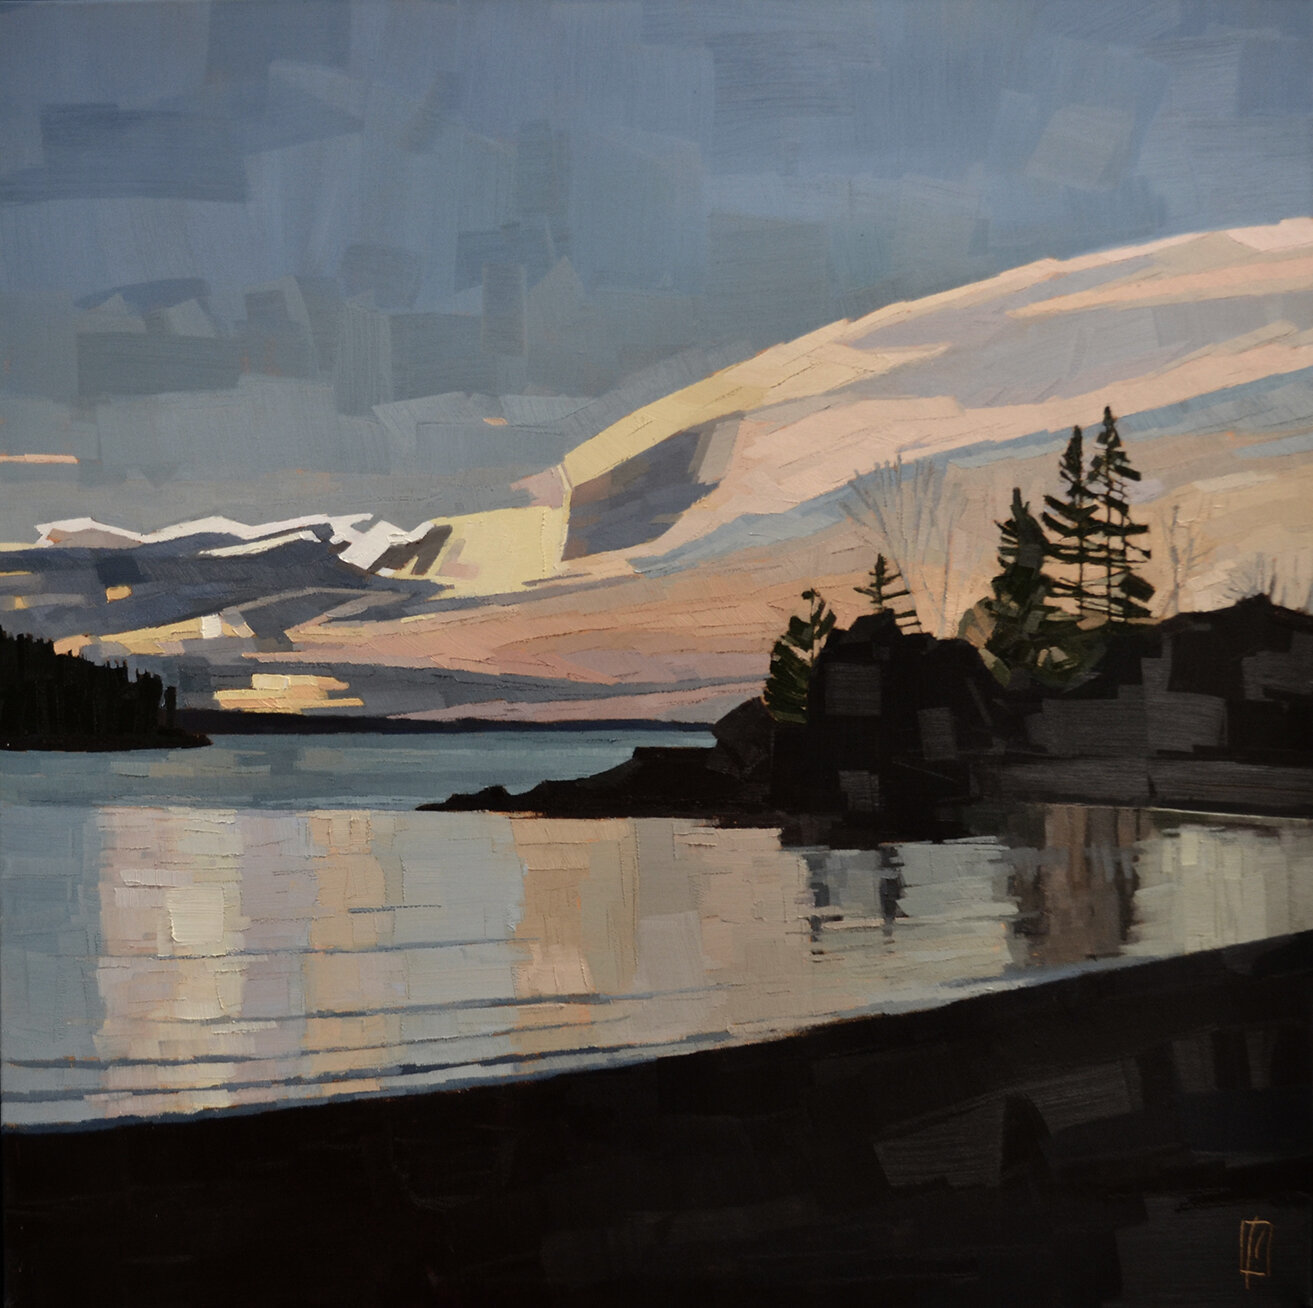   Sky Paints the Water  30 x 30 oil on linen  sold  NW Barrett Gallery  